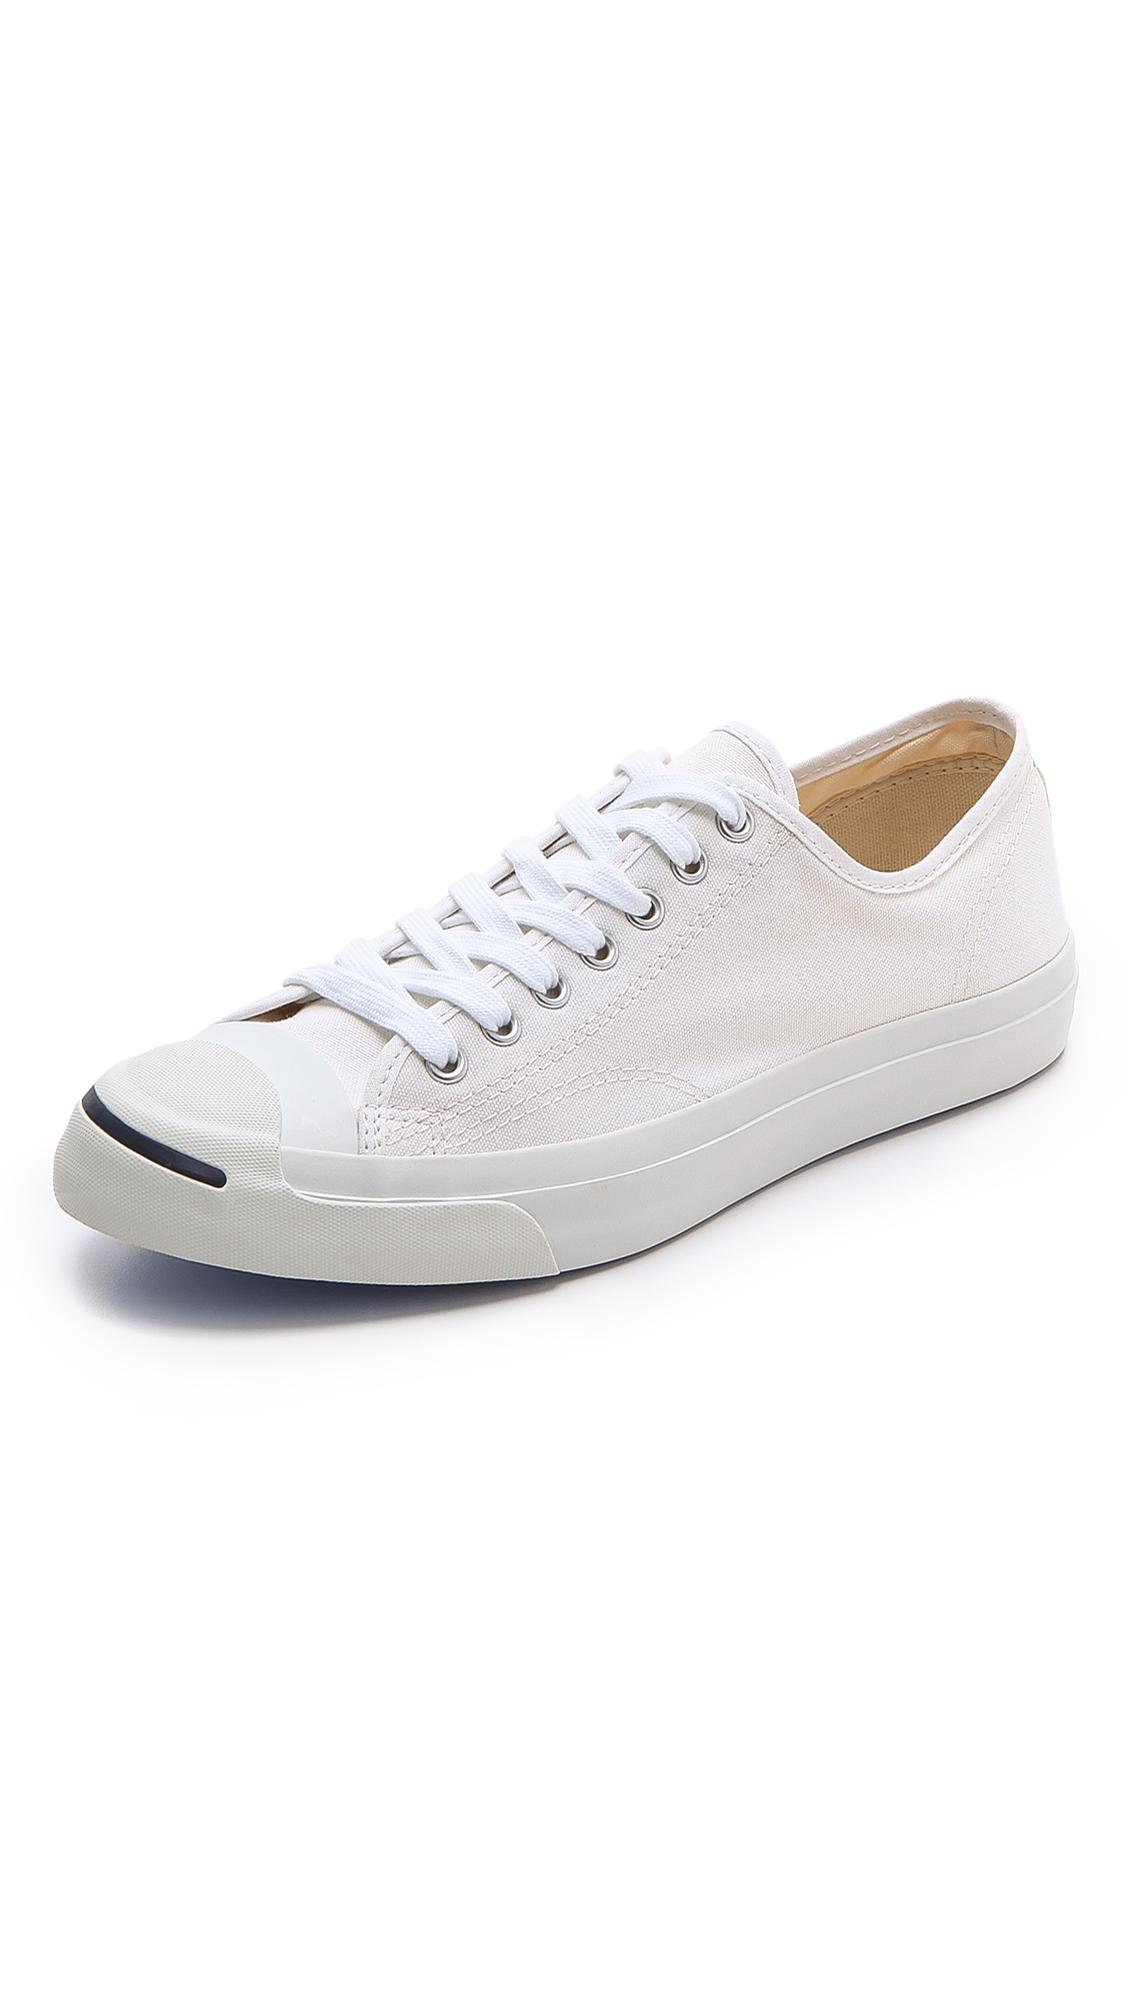 converse jack purcell canvas sneakers shoes